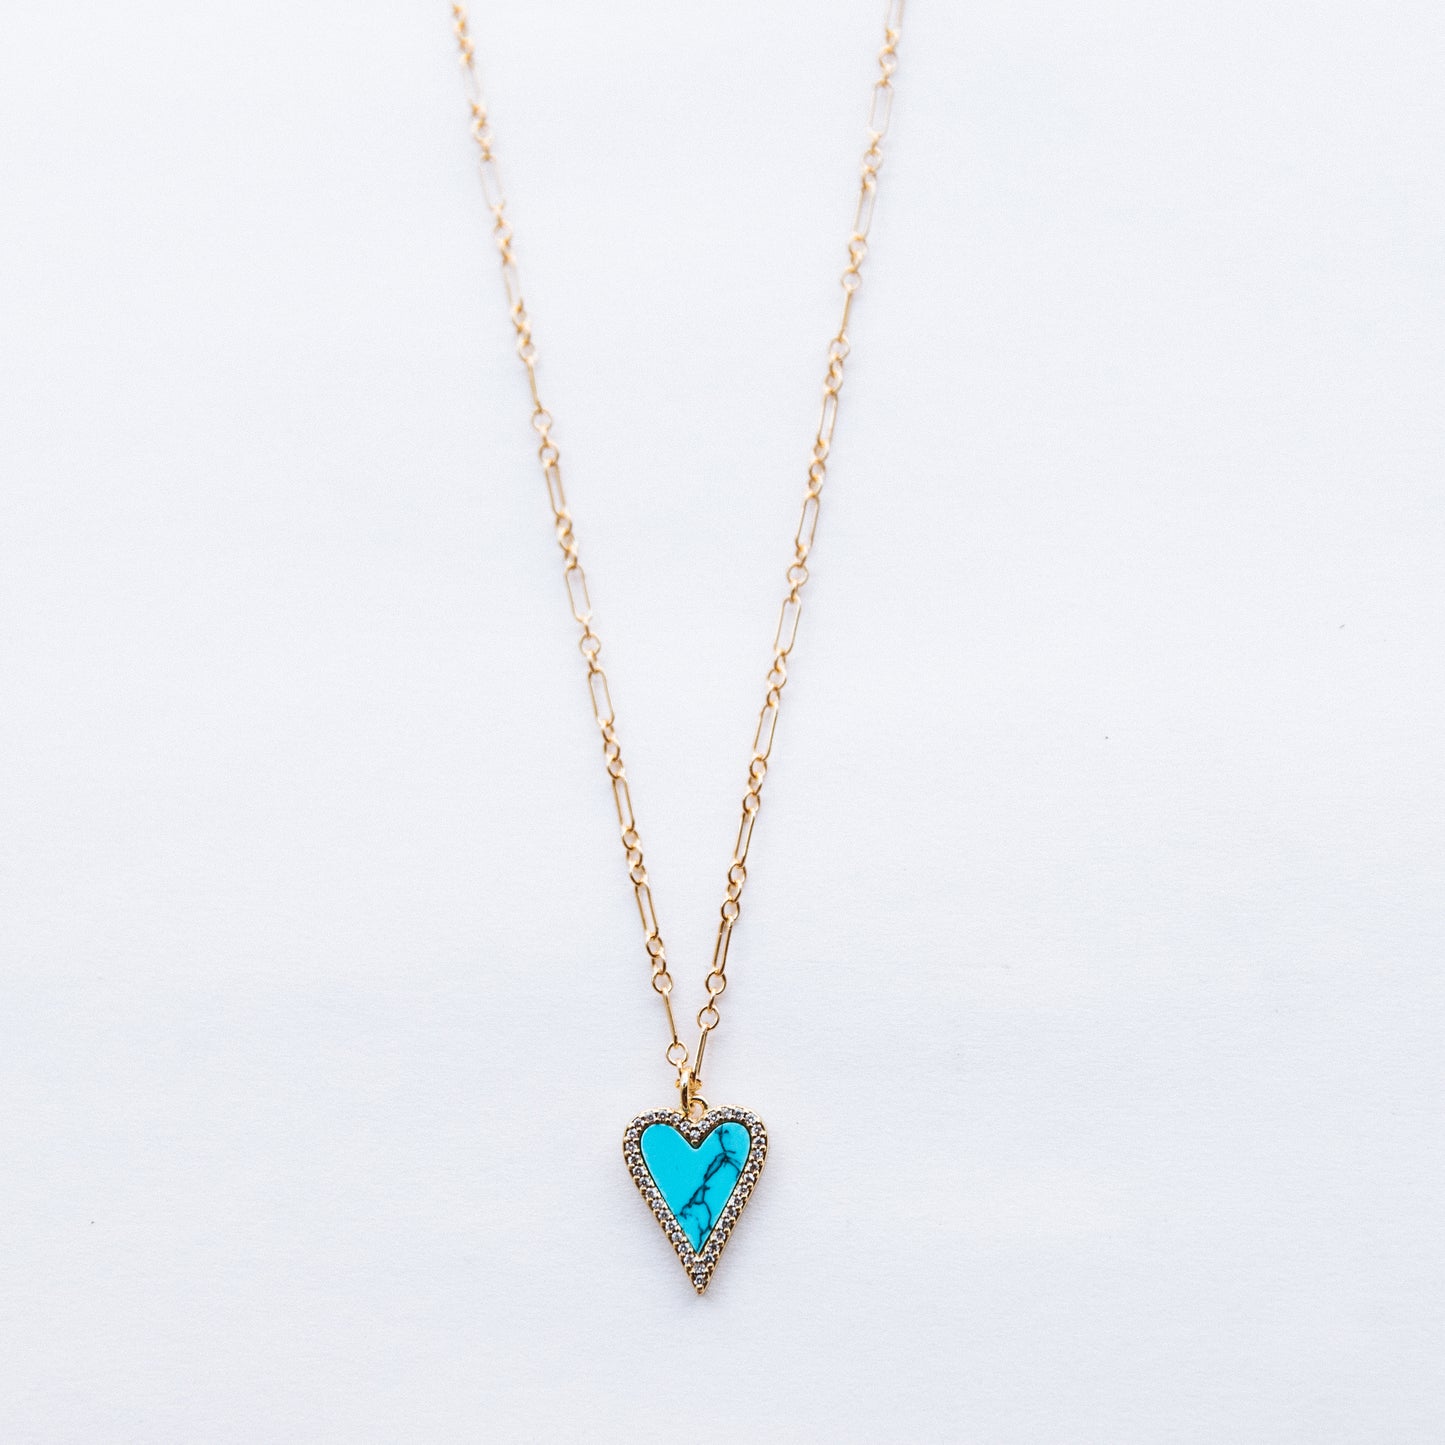 The Turquoise Heart Necklace